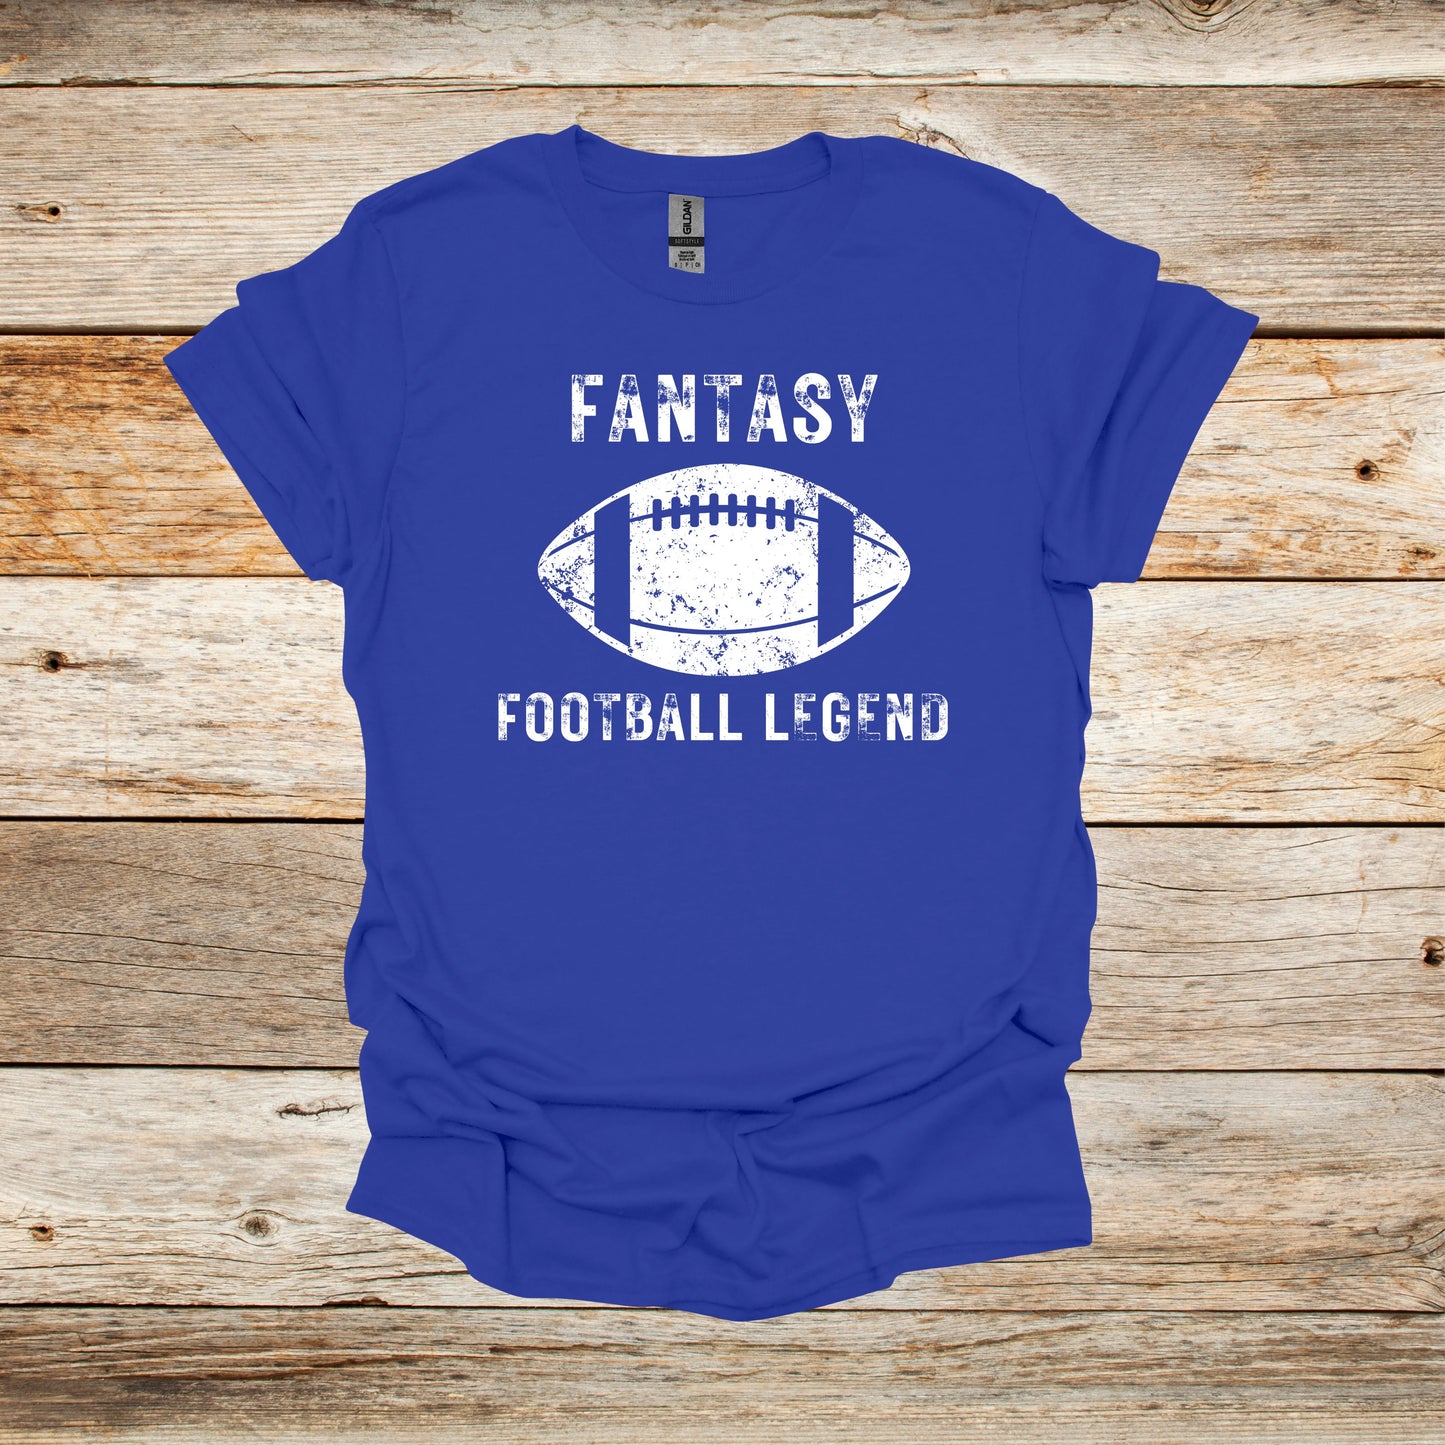 Football T-Shirt - Adult and Children's Tee Shirts - Fantasy Football - Sports T-Shirts Graphic Avenue Royal Adult Small 